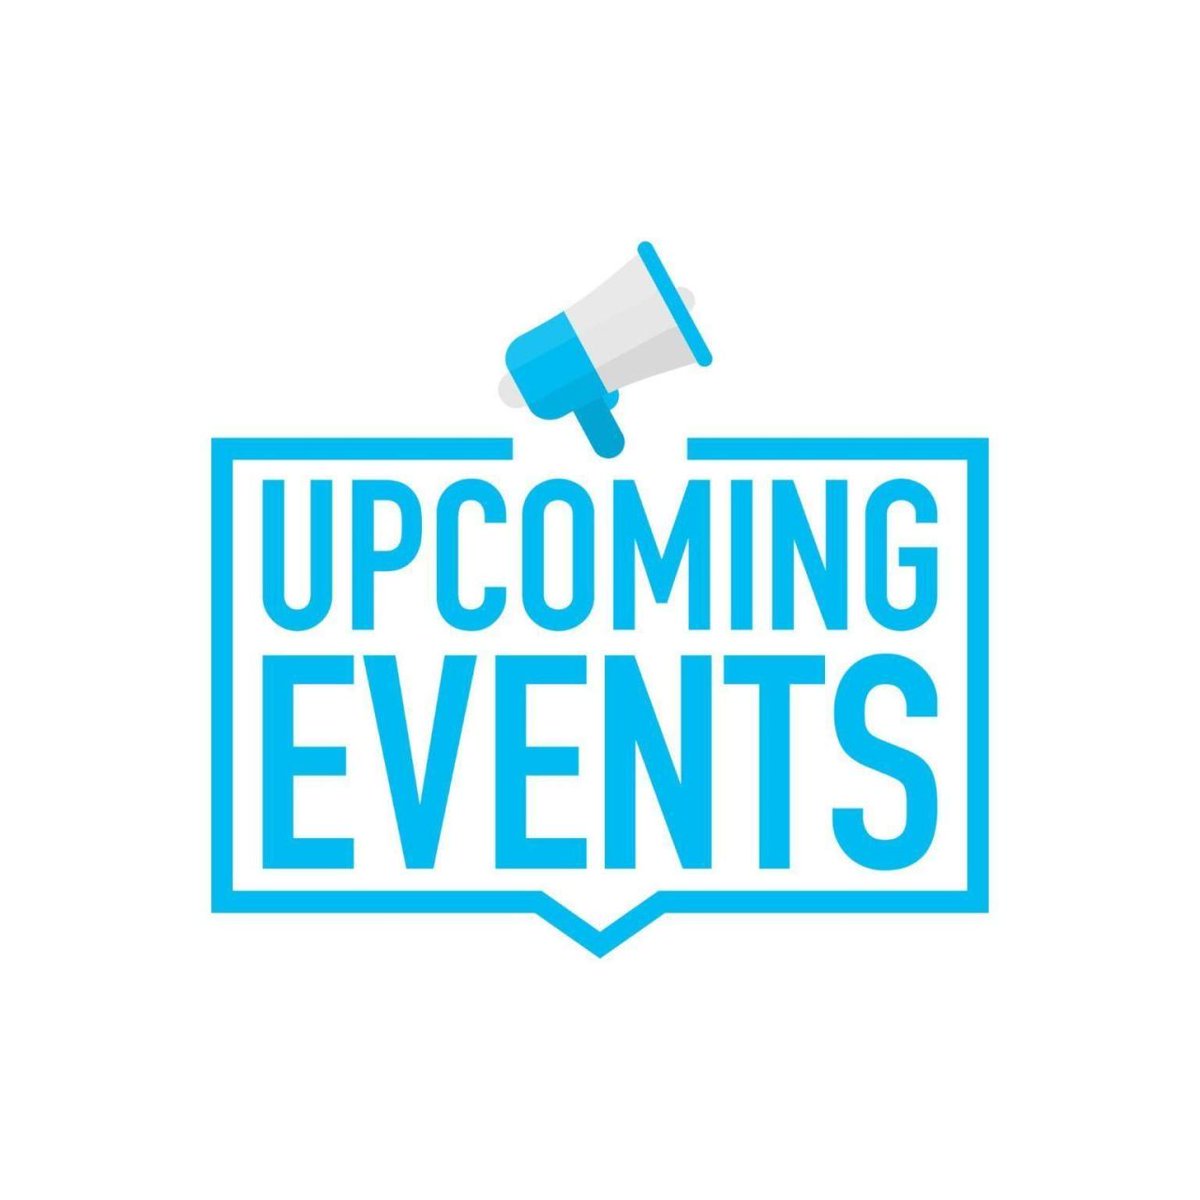 ⏰ UPCOMING EVENTS ⏰ This week we will be welcoming delegates from across the public, voluntary, and private sectors to the following events... ☑️ The Youth Services Conference 2024 ☑️ The Care Homes Conference 2024 ☑️ The Offender Management Conference 2024